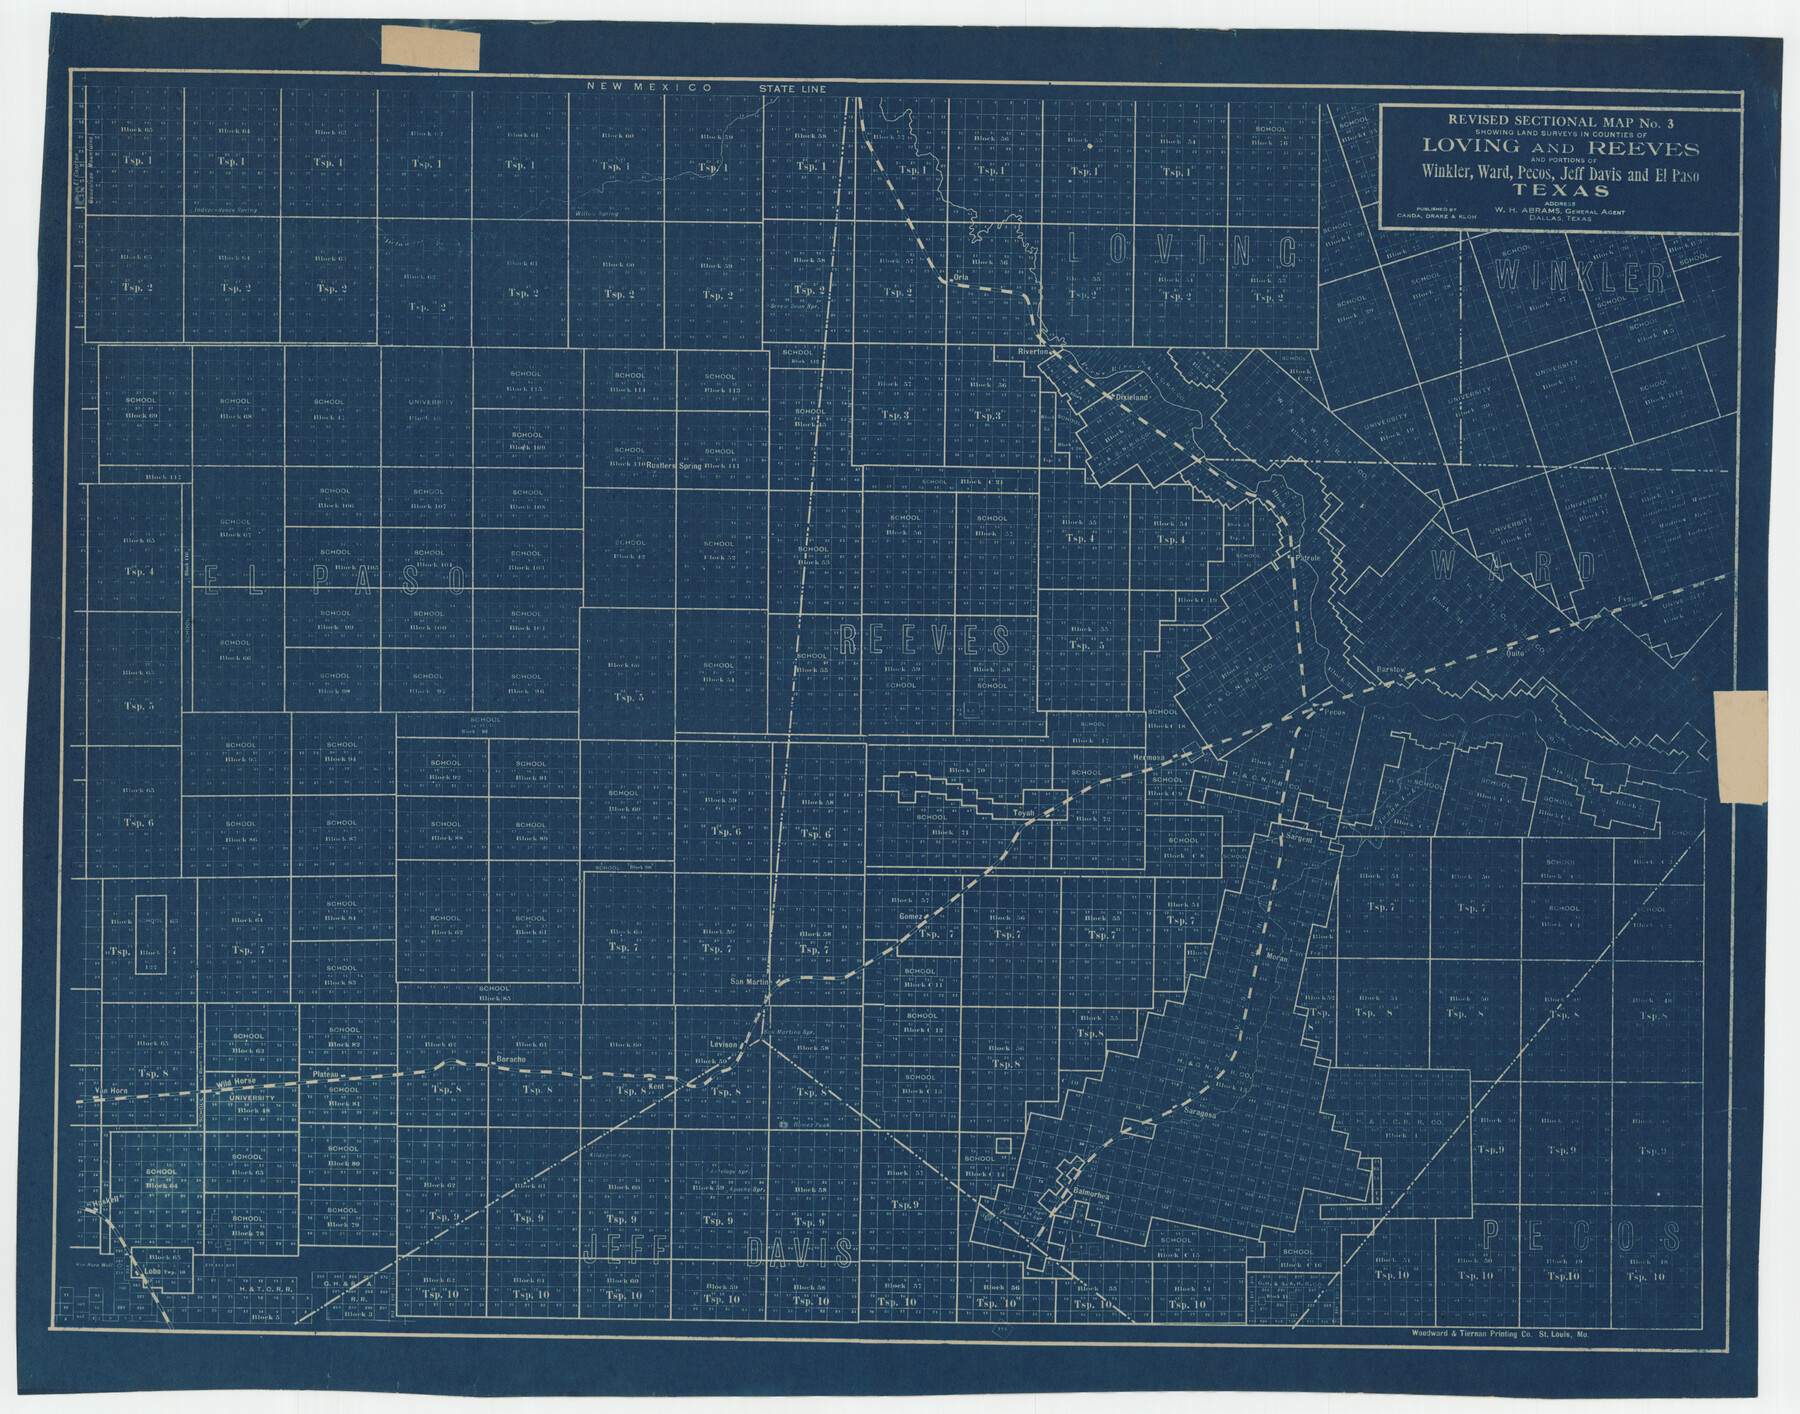 92902, Revised Sectional Map No. 3 Showing Land Surveys in Counties of Loving and Reeves and Portions of Winkler, Ward, Pecos, Jeff Davis and El Paso, Twichell Survey Records